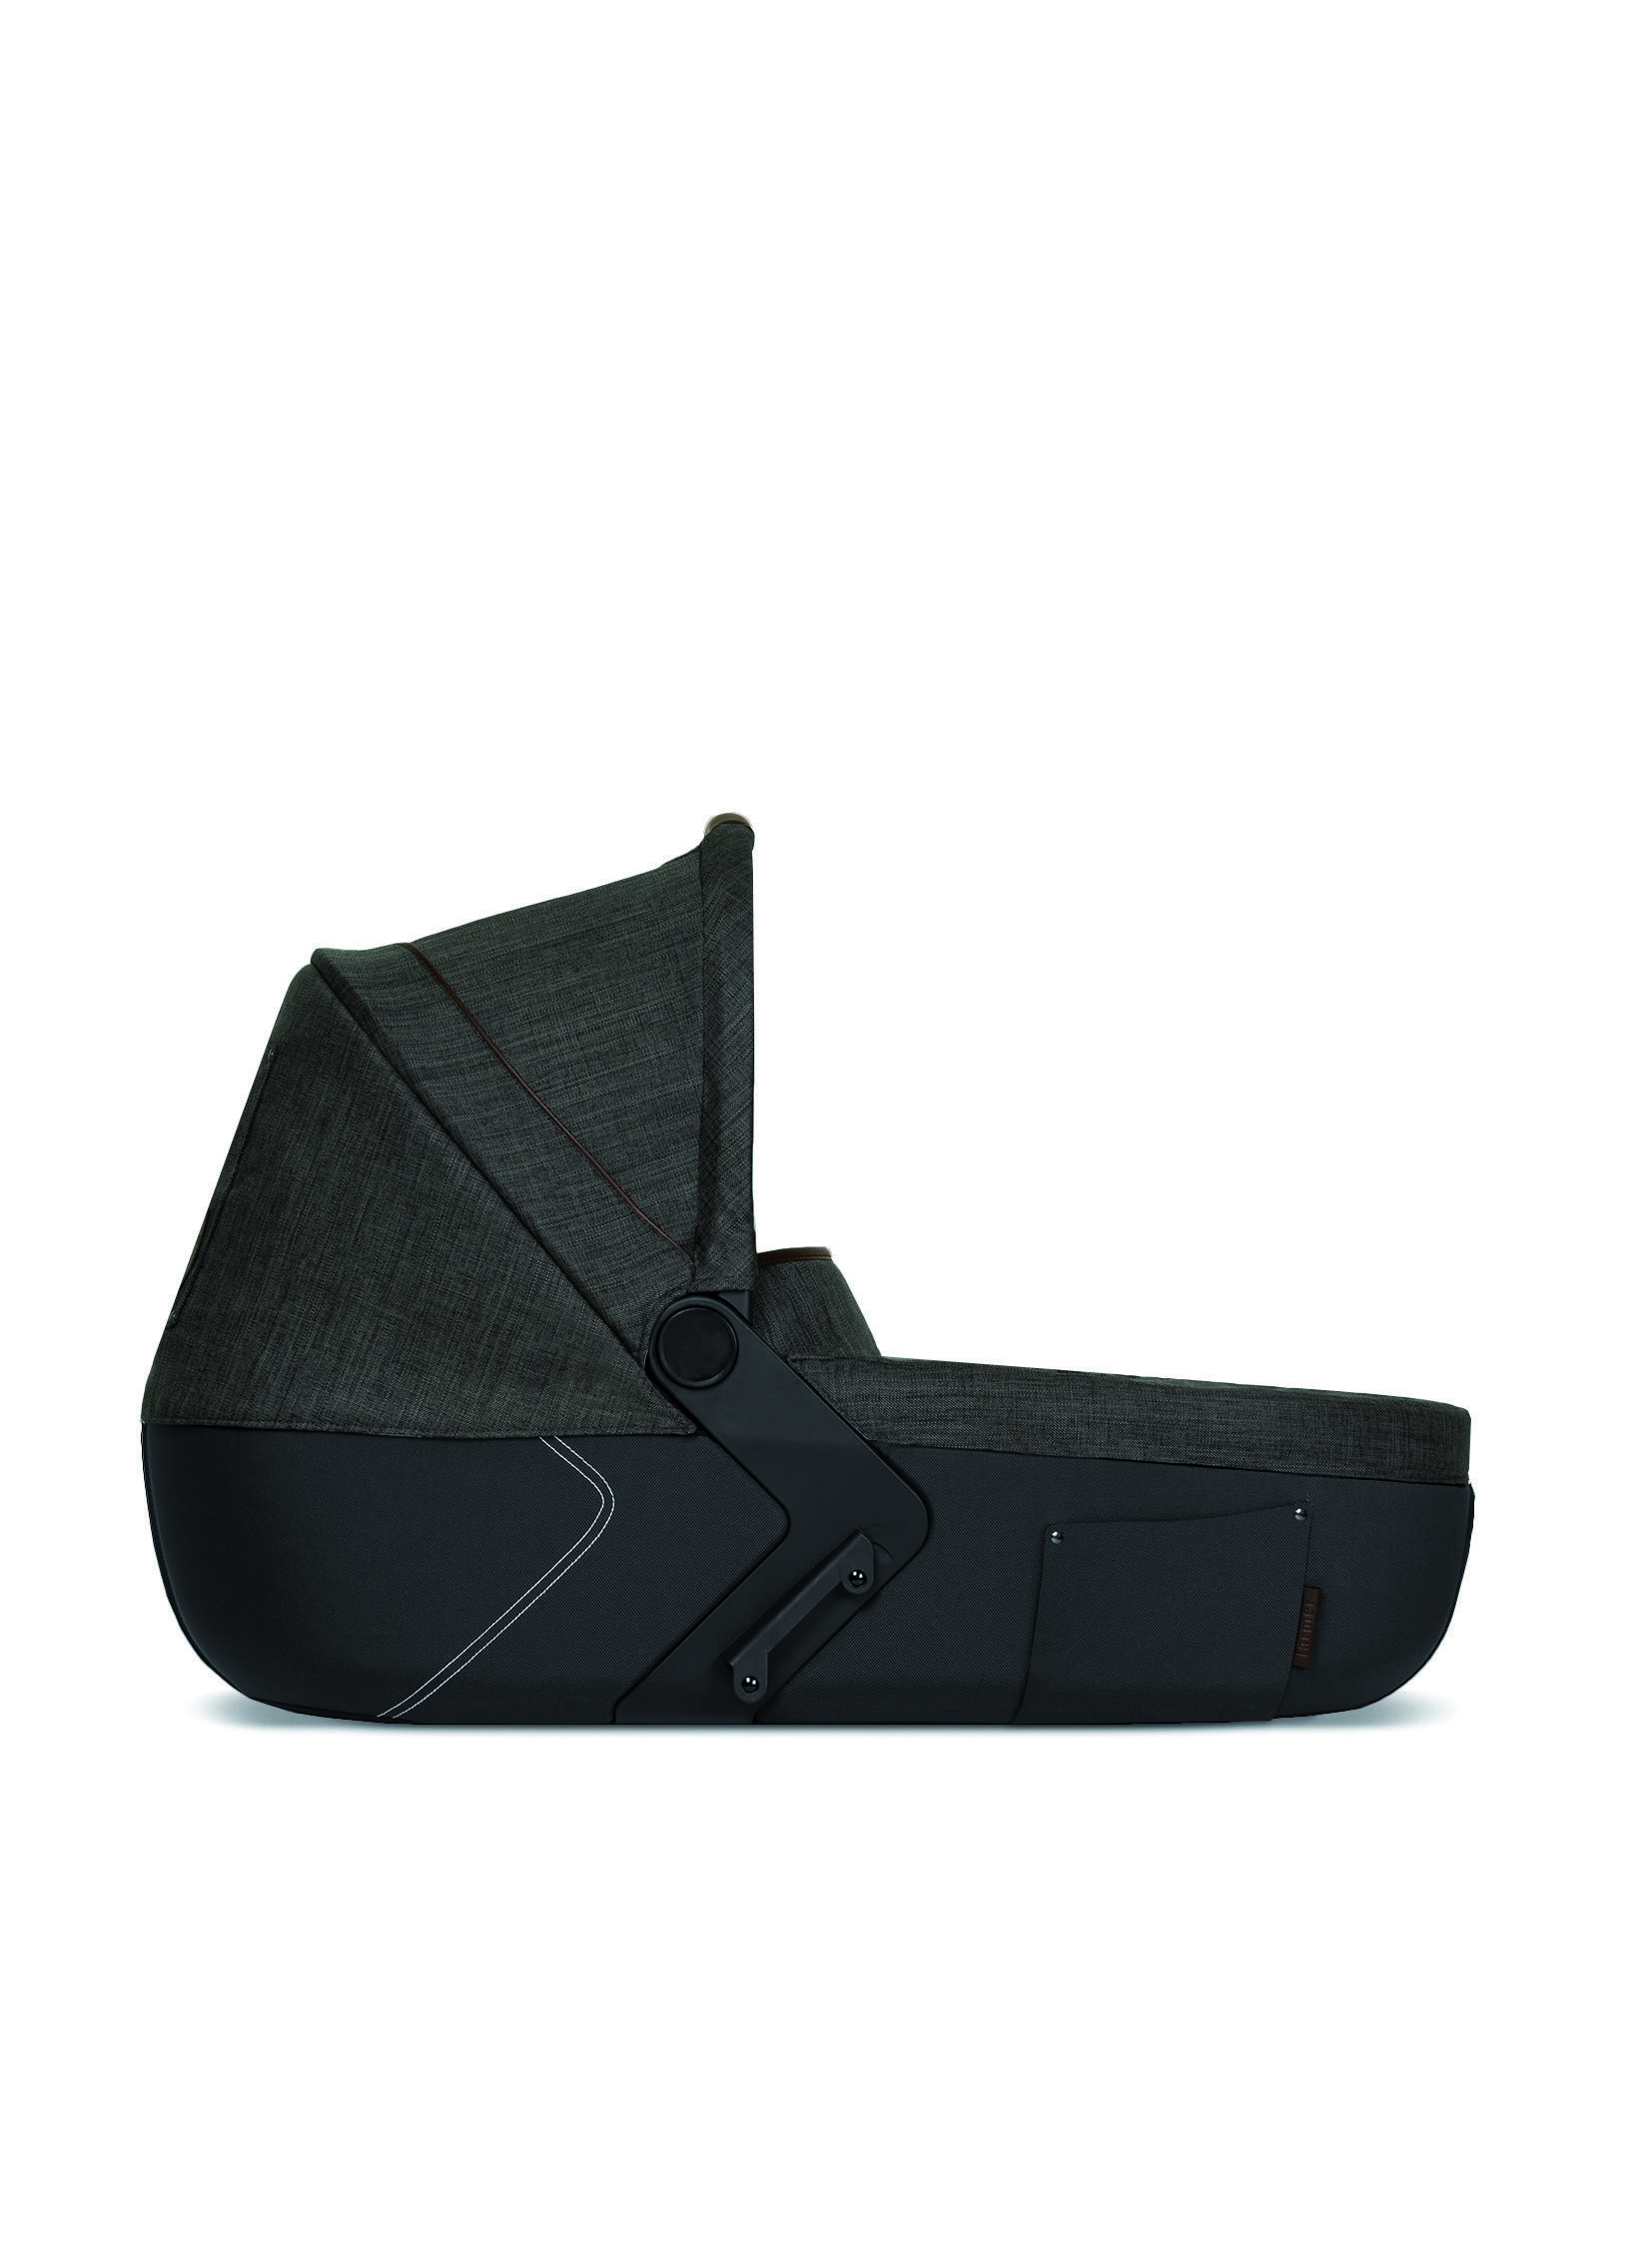 mutsy i2 carrycot